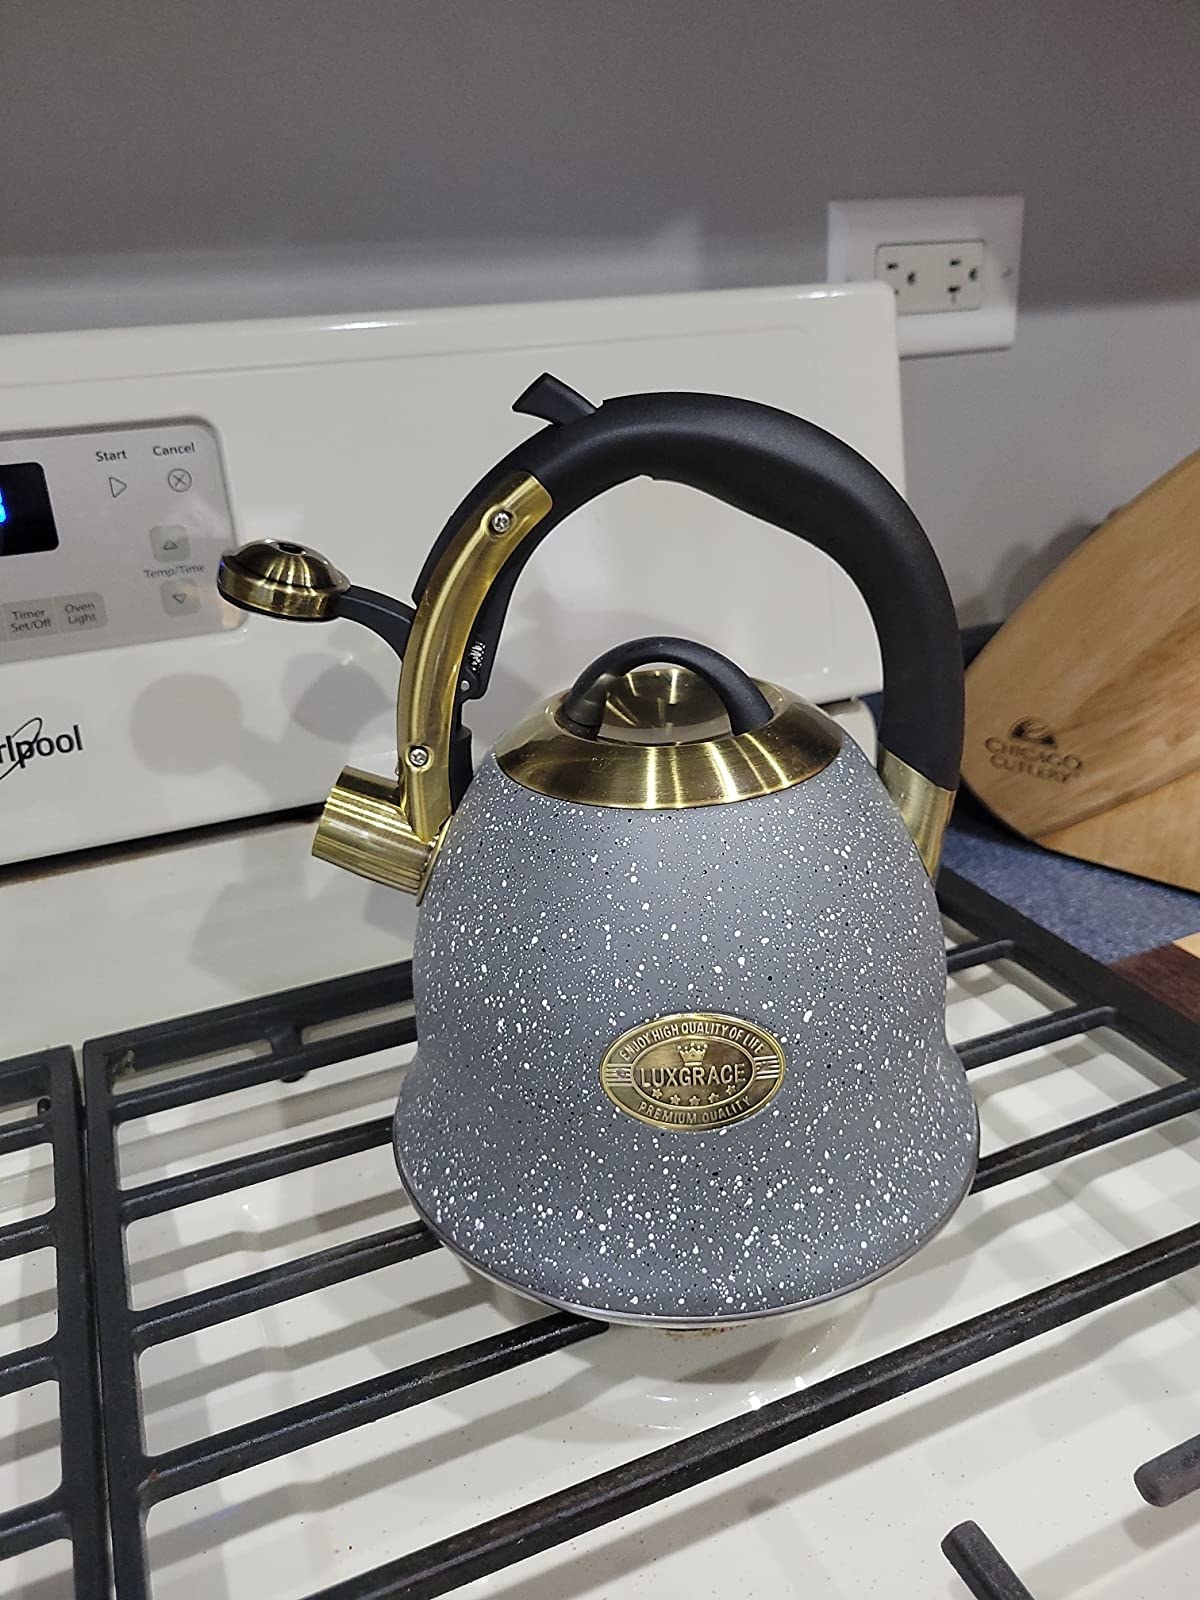 Gray and white speckled tea kettle with gold accents on stovetop